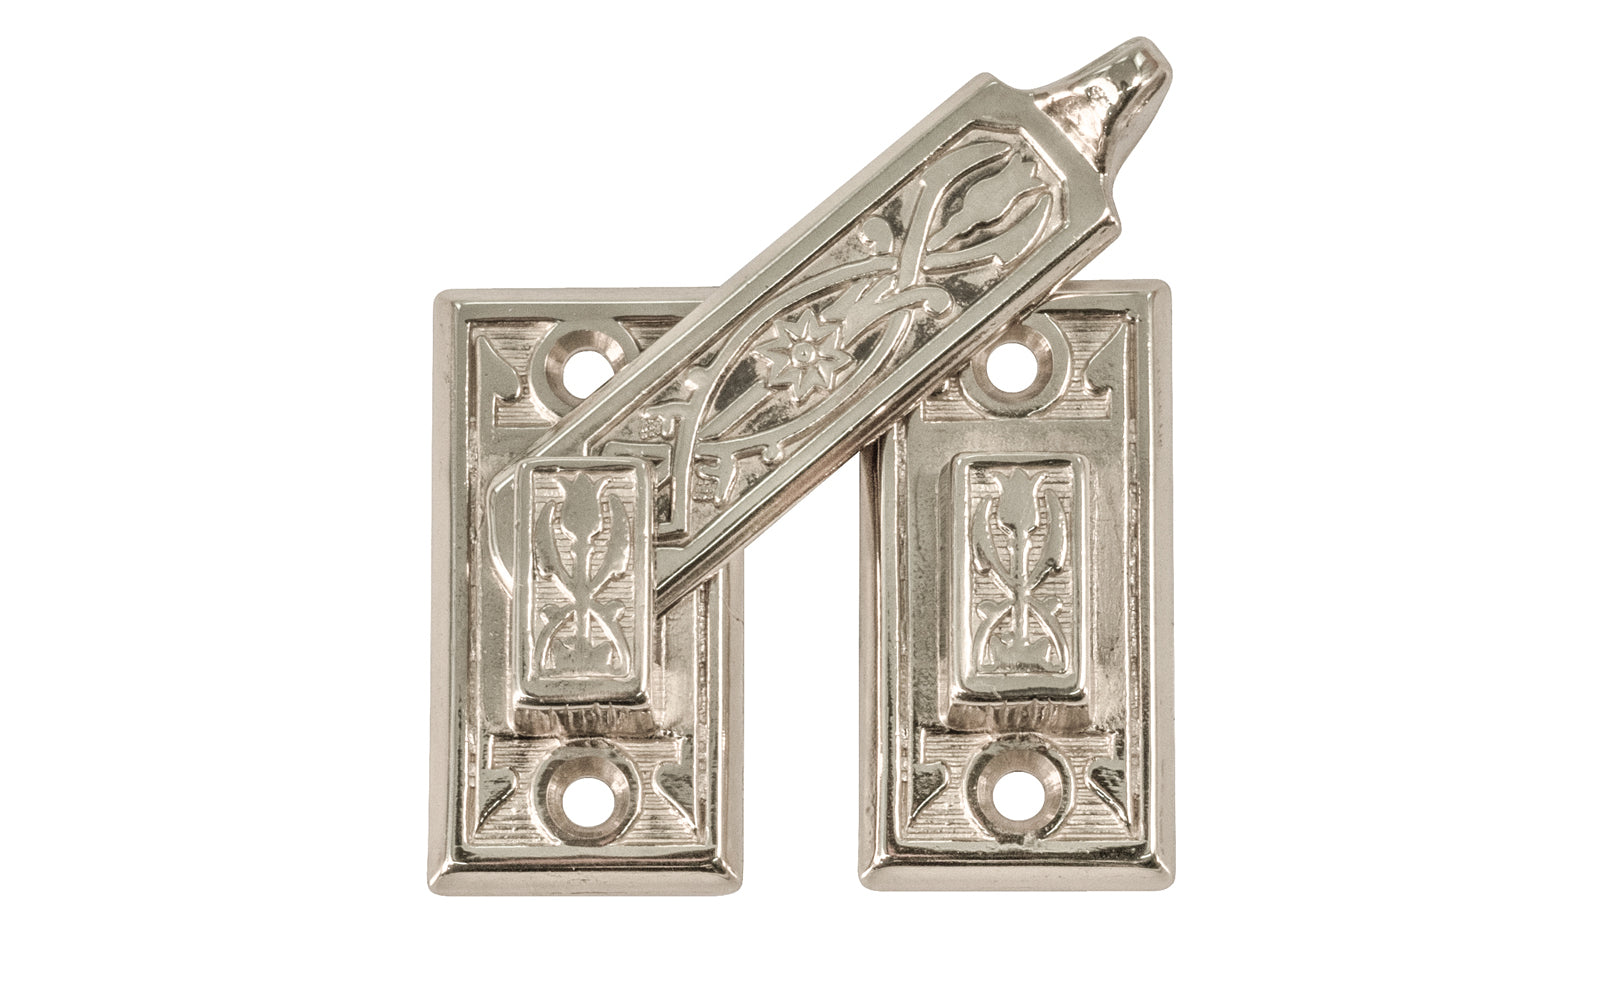 Vintage-style Hardware · Classic & traditional ornate style shutter bar made of solid brass material. Designed for interior window shutters, but it may be used on cabinet doors, bi-fold doors, pantry doors, windows, small doors. Victorian Style, Eastlake style hardware. Polished Nickel finish.